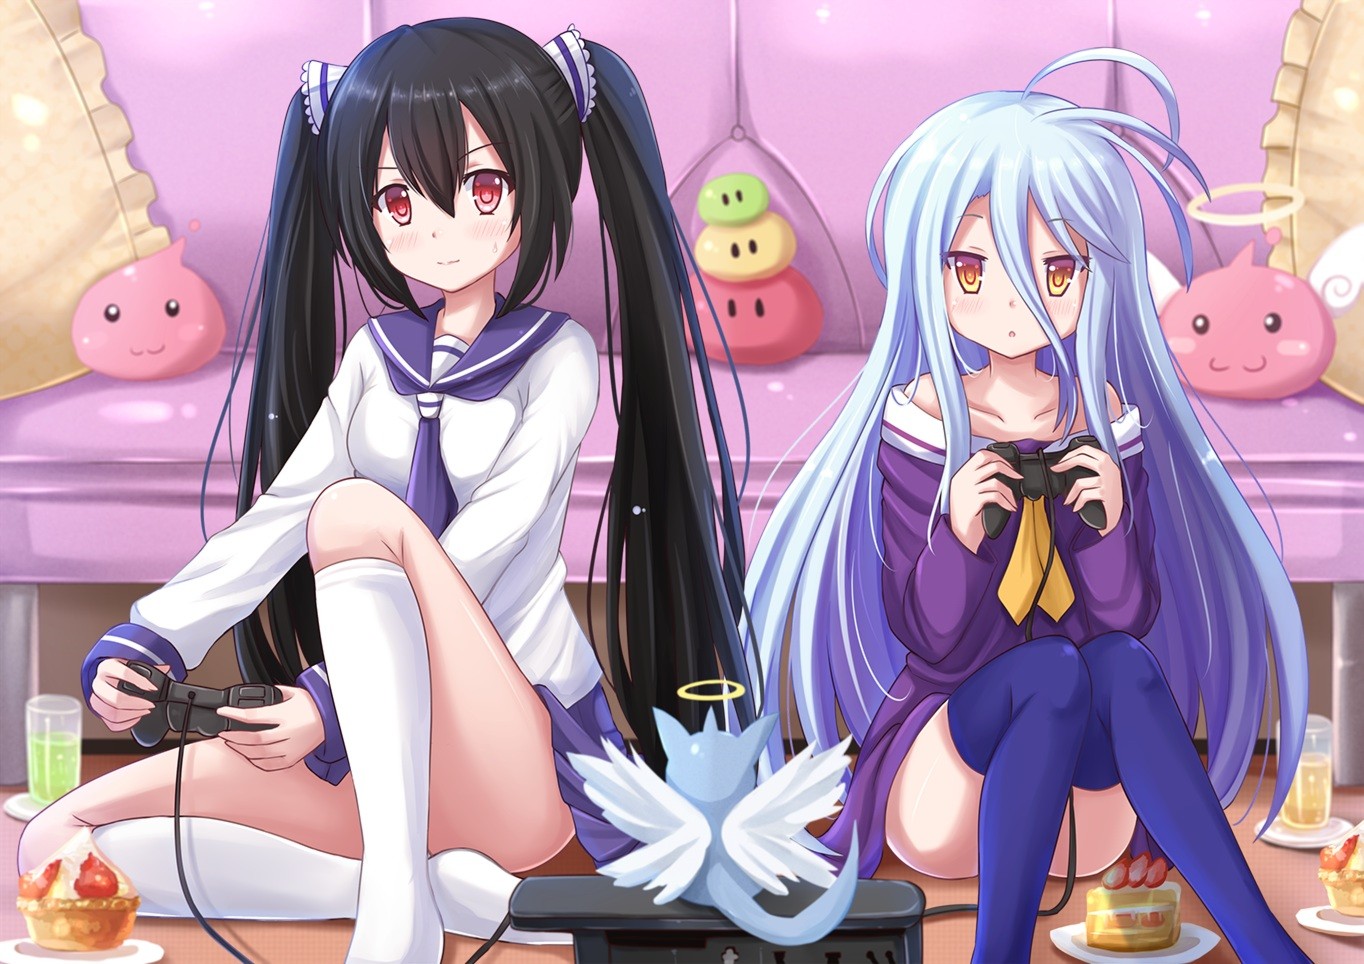 Anime 1364x964 anime anime girls No Game No Life Shiro (No Game No Life) original characters twintails school uniform video games DeviantArt controllers gamer thighs together long hair tie black hair blue hair stockings socks